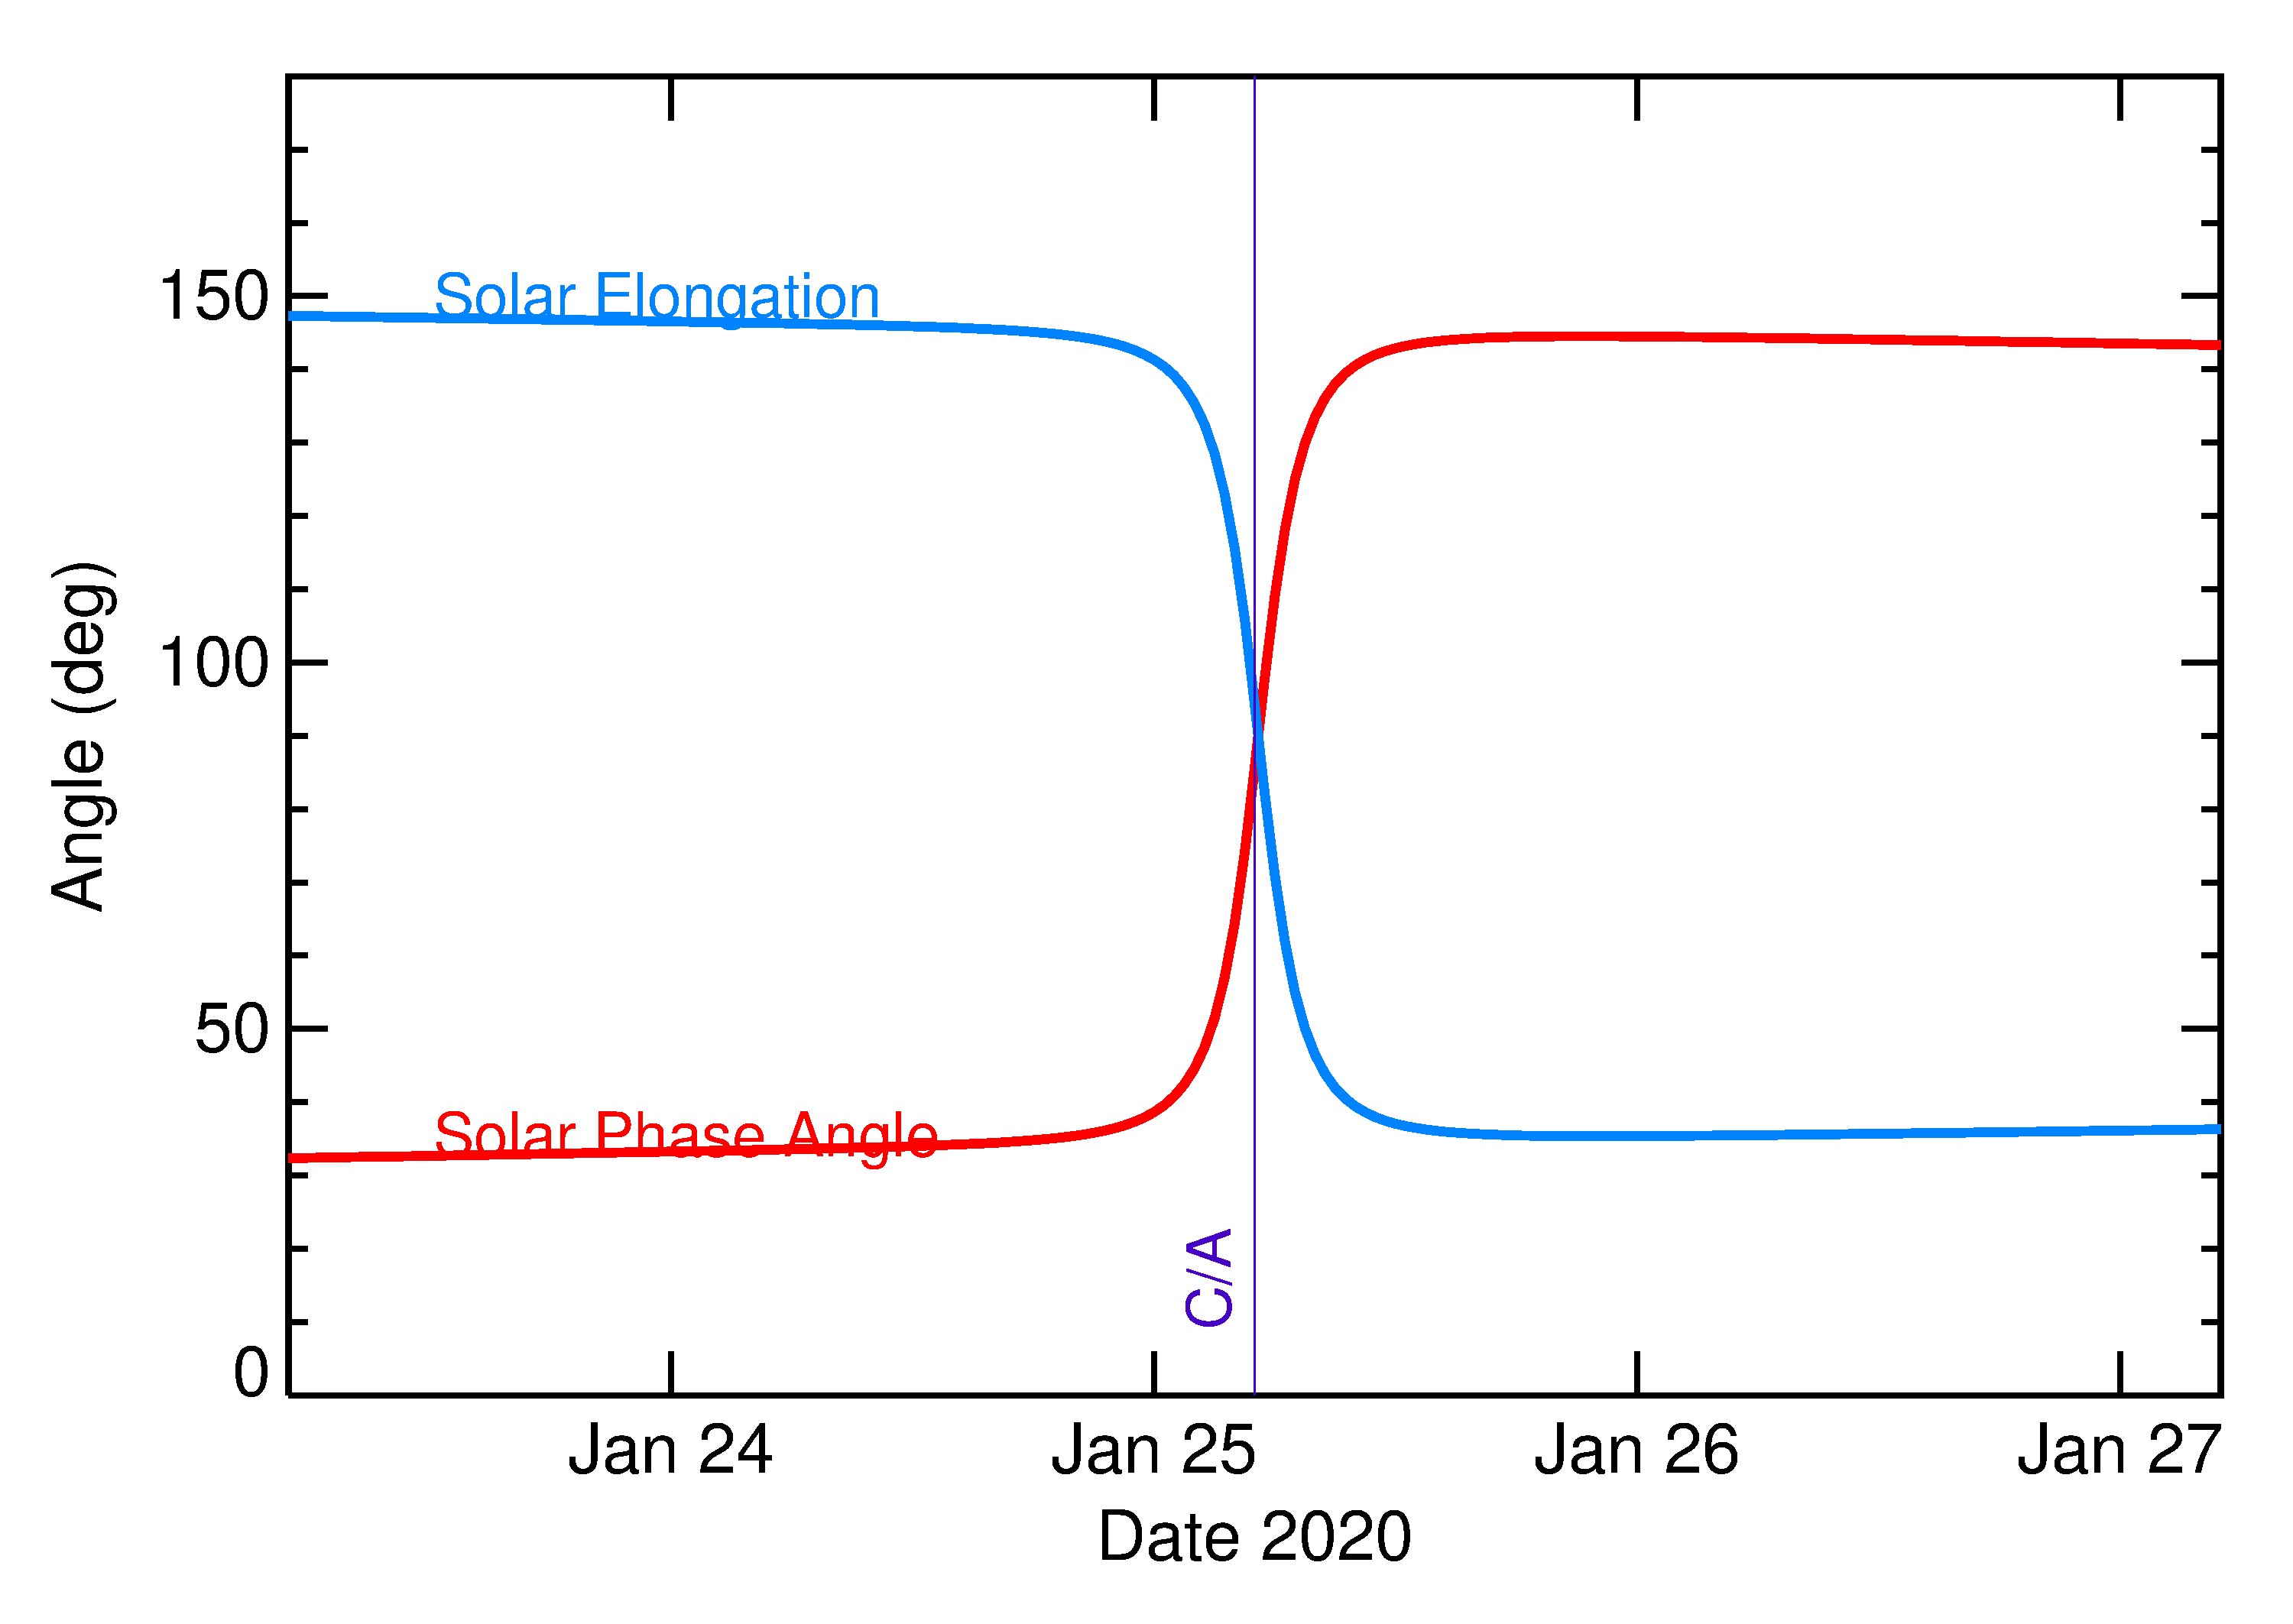 Solar Elongation and Solar Phase Angle of 2020 BH6 in the days around closest approach